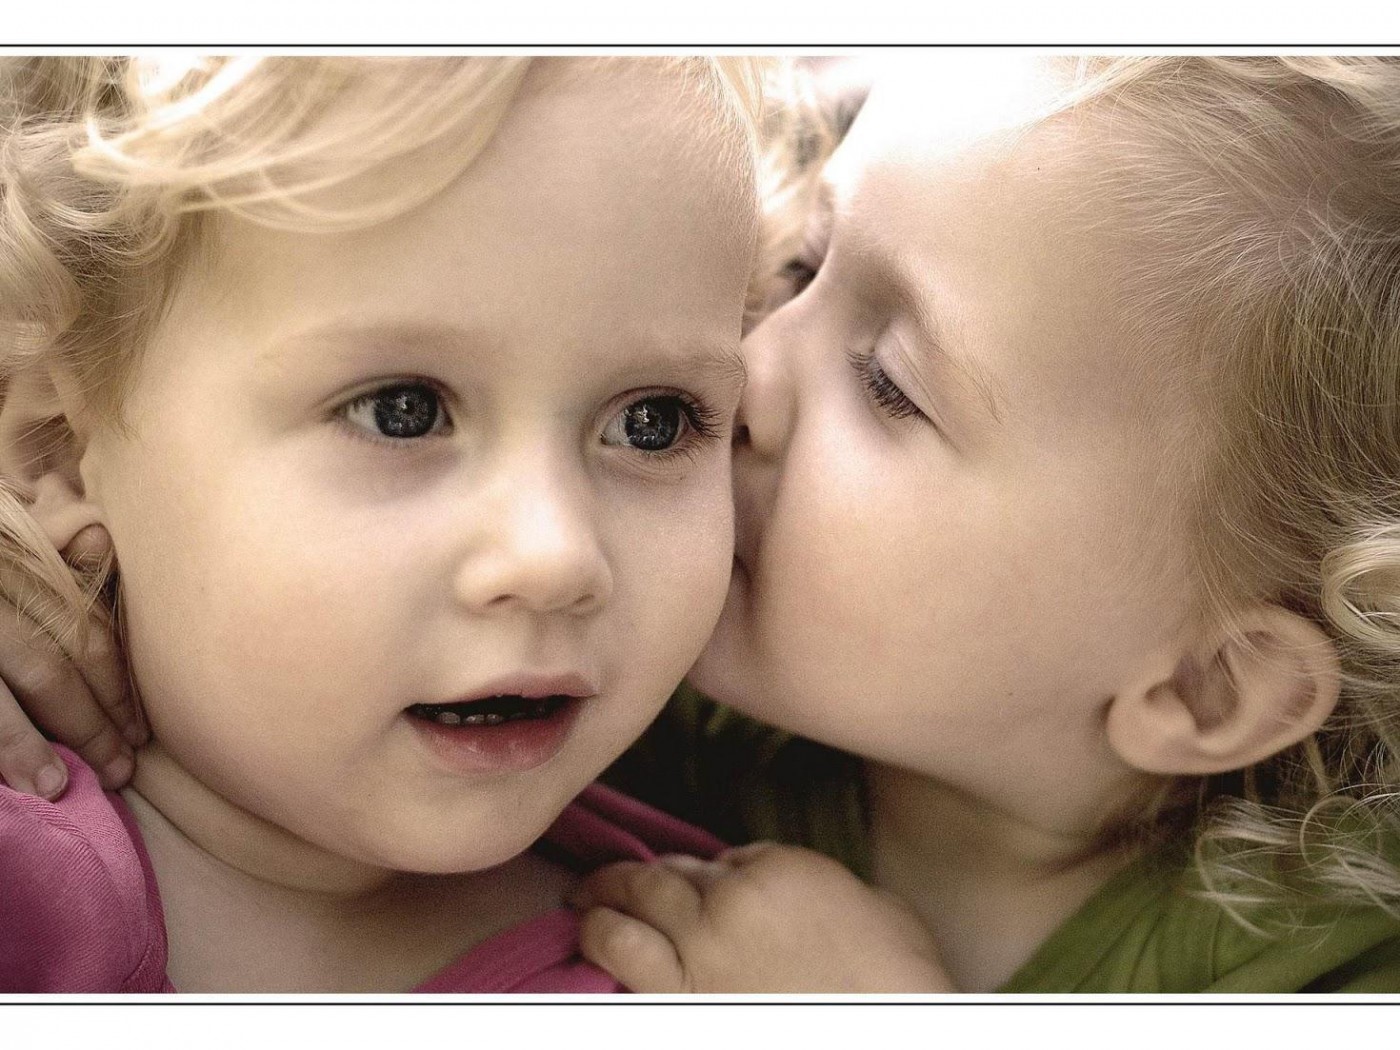 Baby And Baby Kissing - HD Wallpaper 